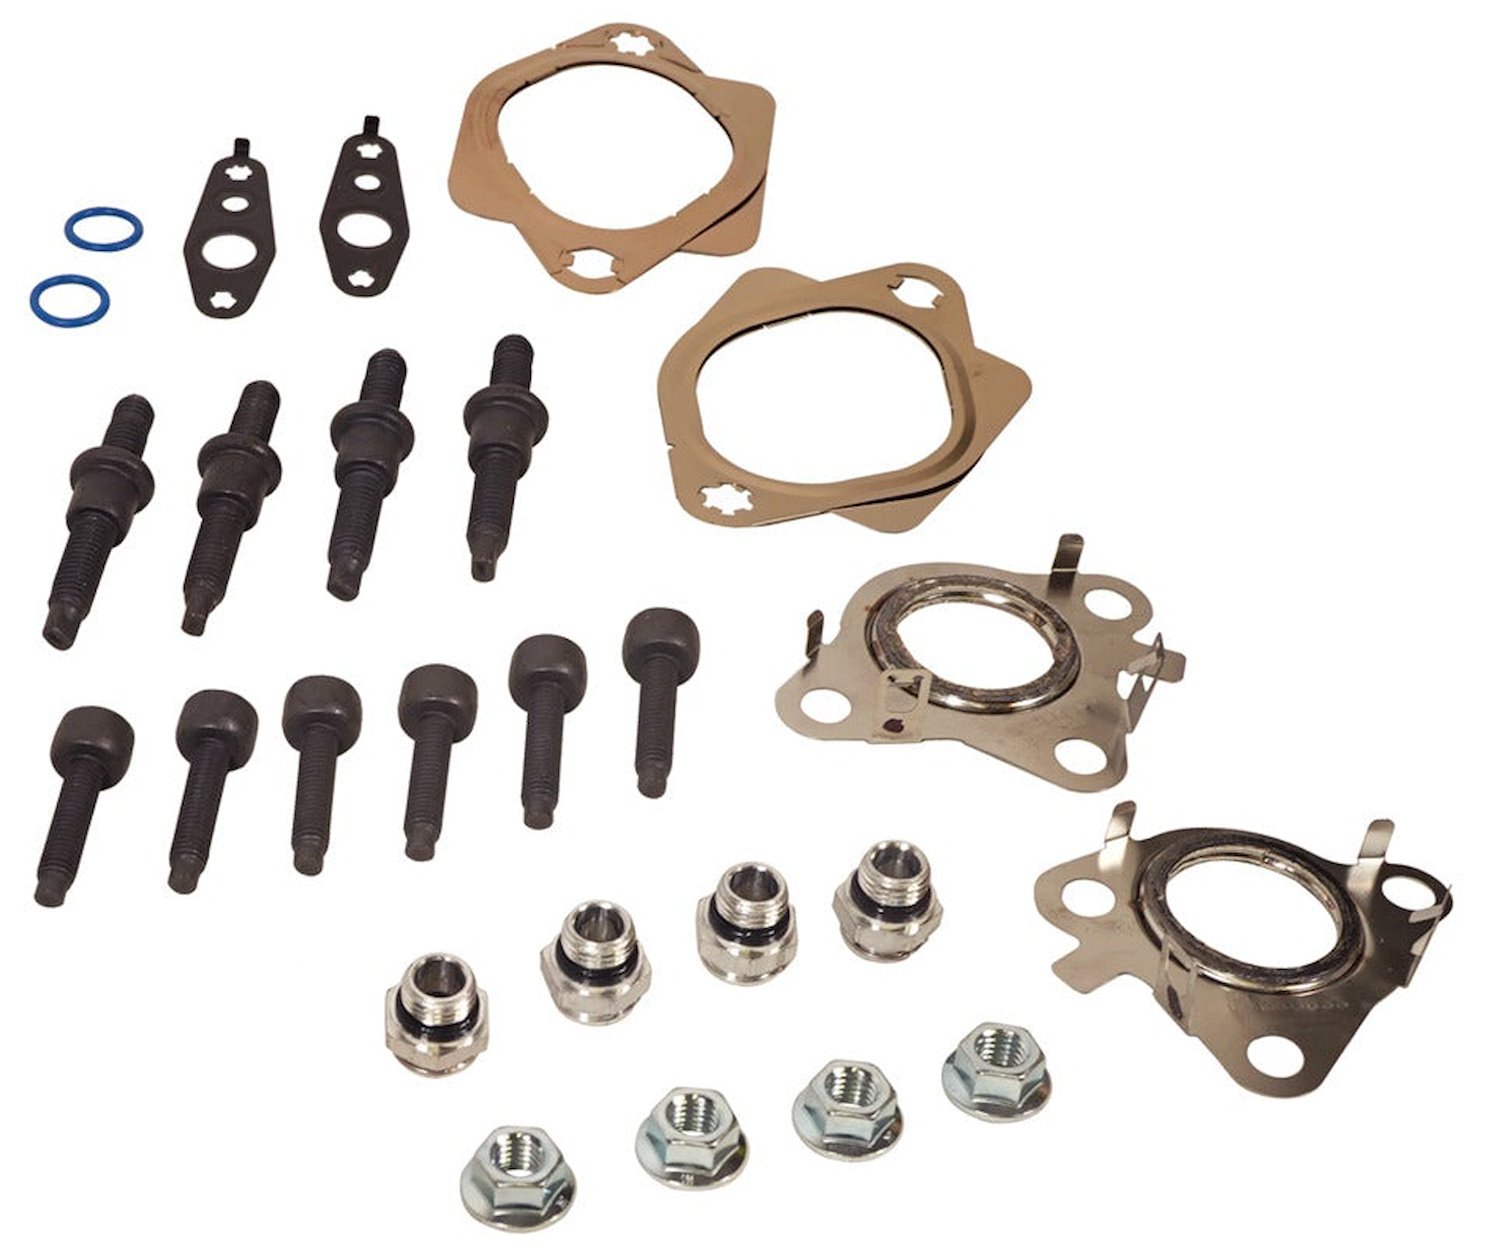 BD Diesel 1043002: Exhaust Manifold Install Kit 2011-2016 Ford F-150 3.5L  Ecoboost 1043001 Exhaust Manifold Includes: (4) Coolant Fittings, (4)  Exhaust Downpipe Studs, (4) Exhaust Nuts, (6) OEM Turbocharger Bolts,  Gaskets JEGS